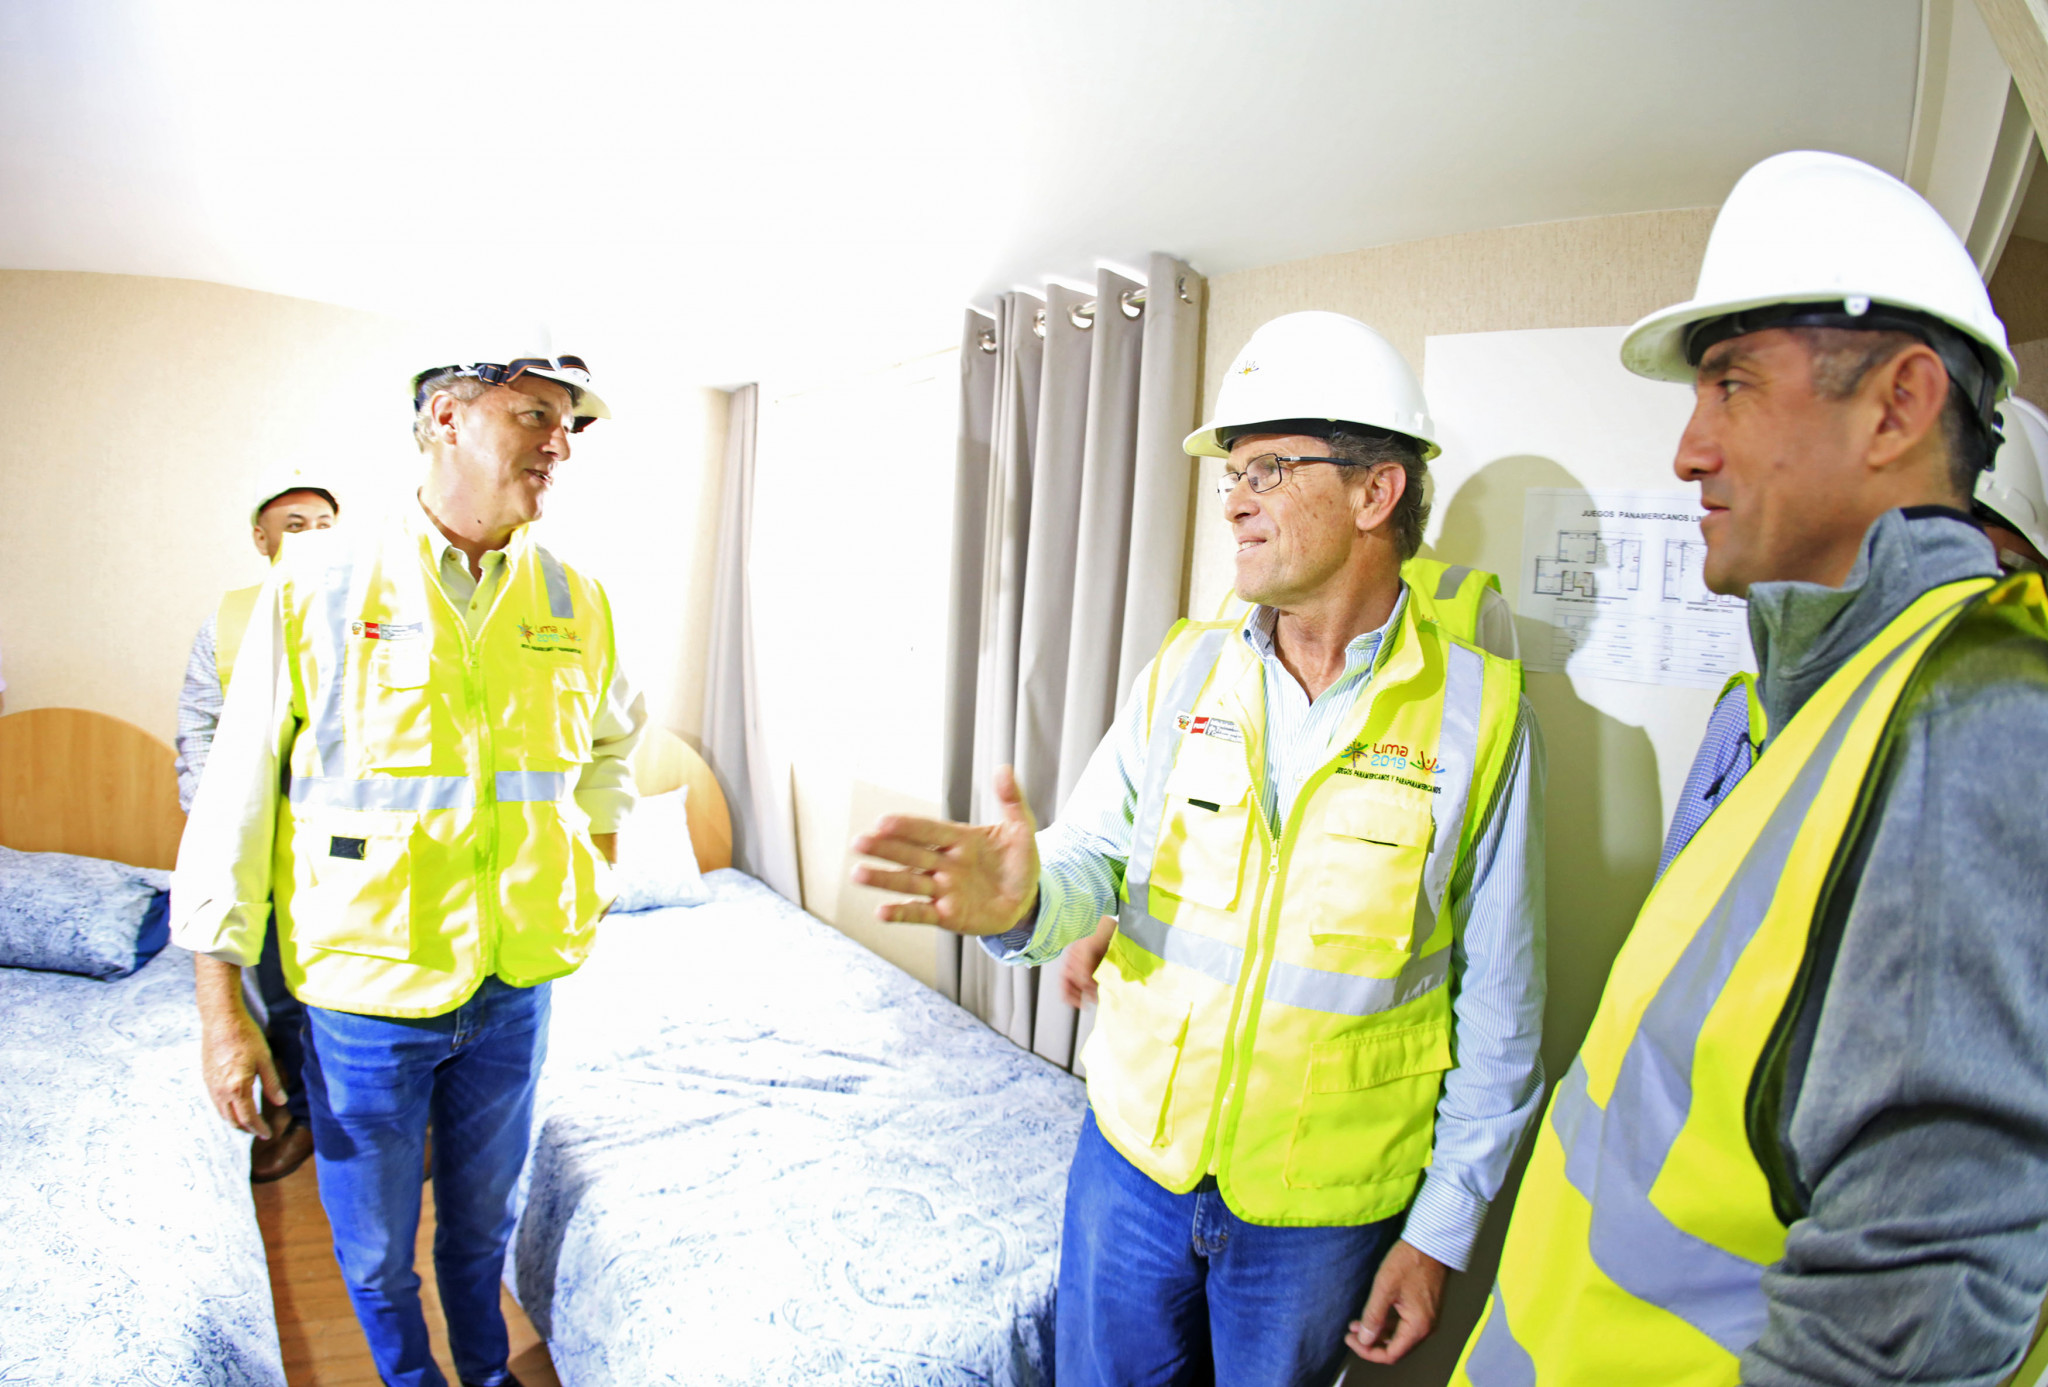 As well as touring the venues, the Mayor-elect of Lima  Jorge Muñoz Wells  also visited the Athletes' Village being built for next year's Pan American and Parapan American Games ©Lima 2019